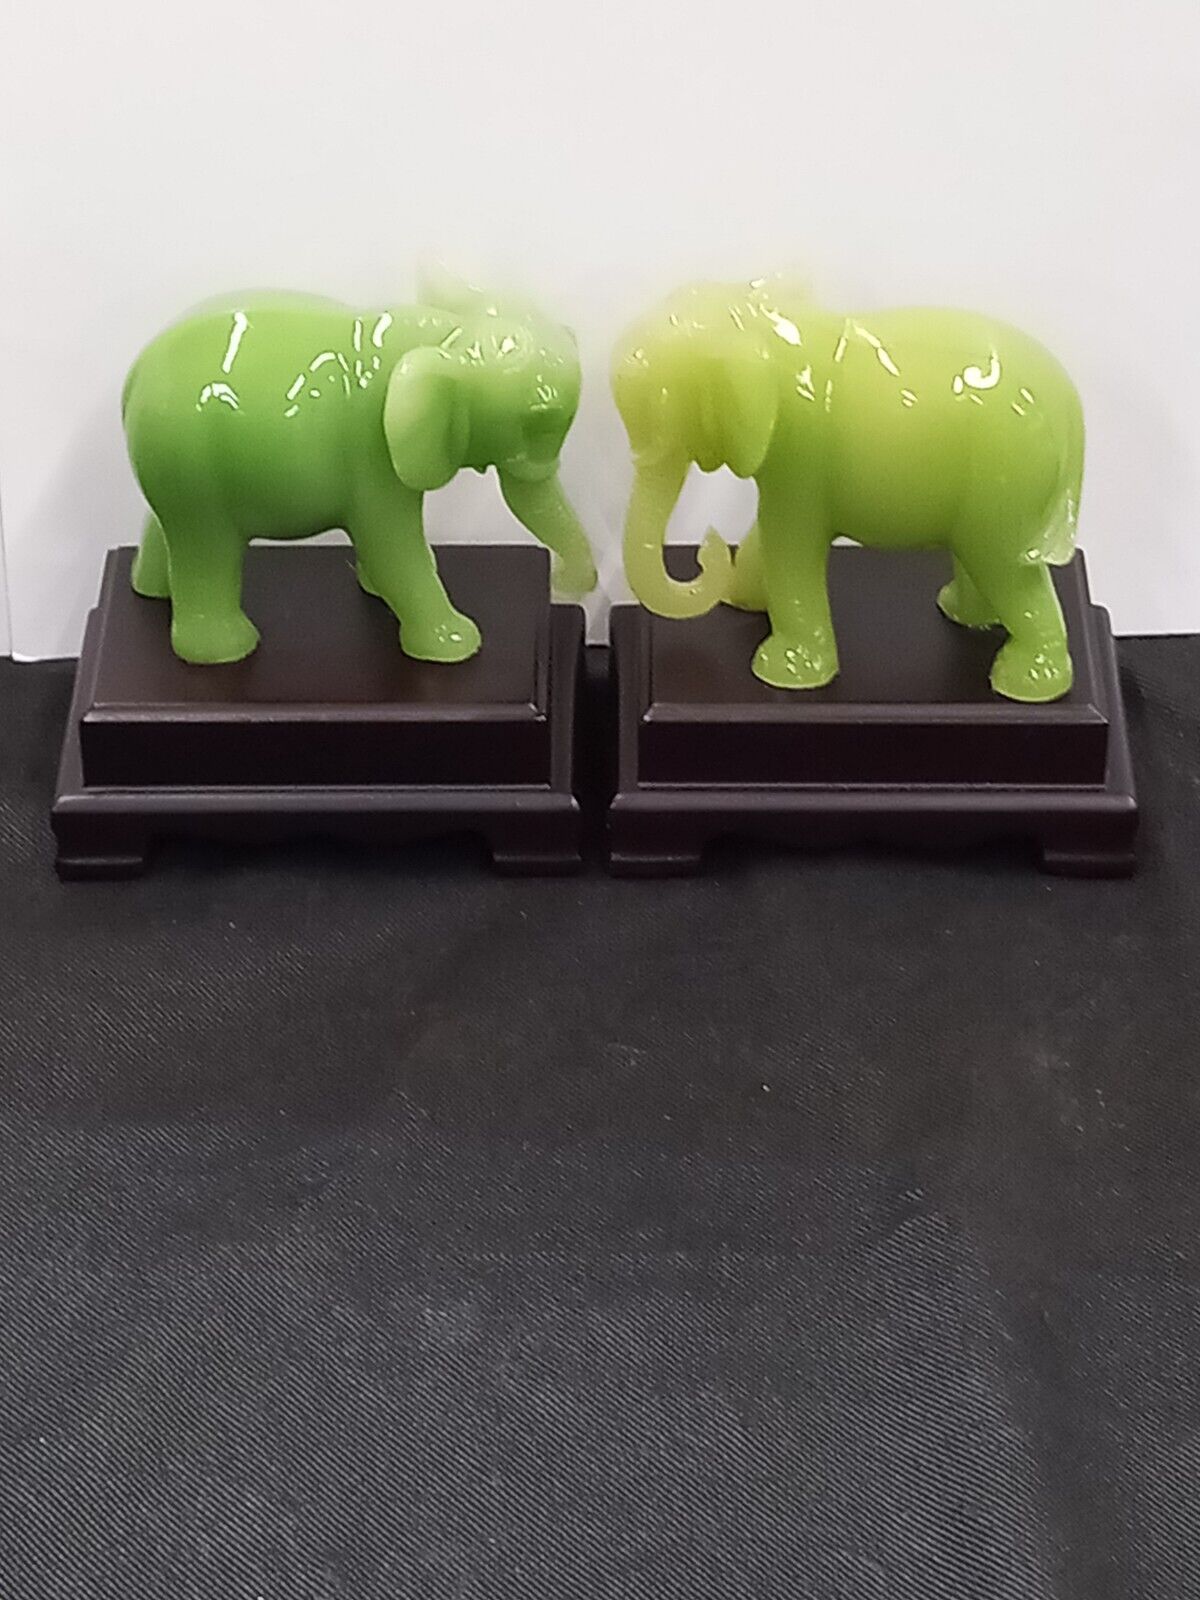 A PAIR of Green Resin Faux Jade Elephant Figurines 